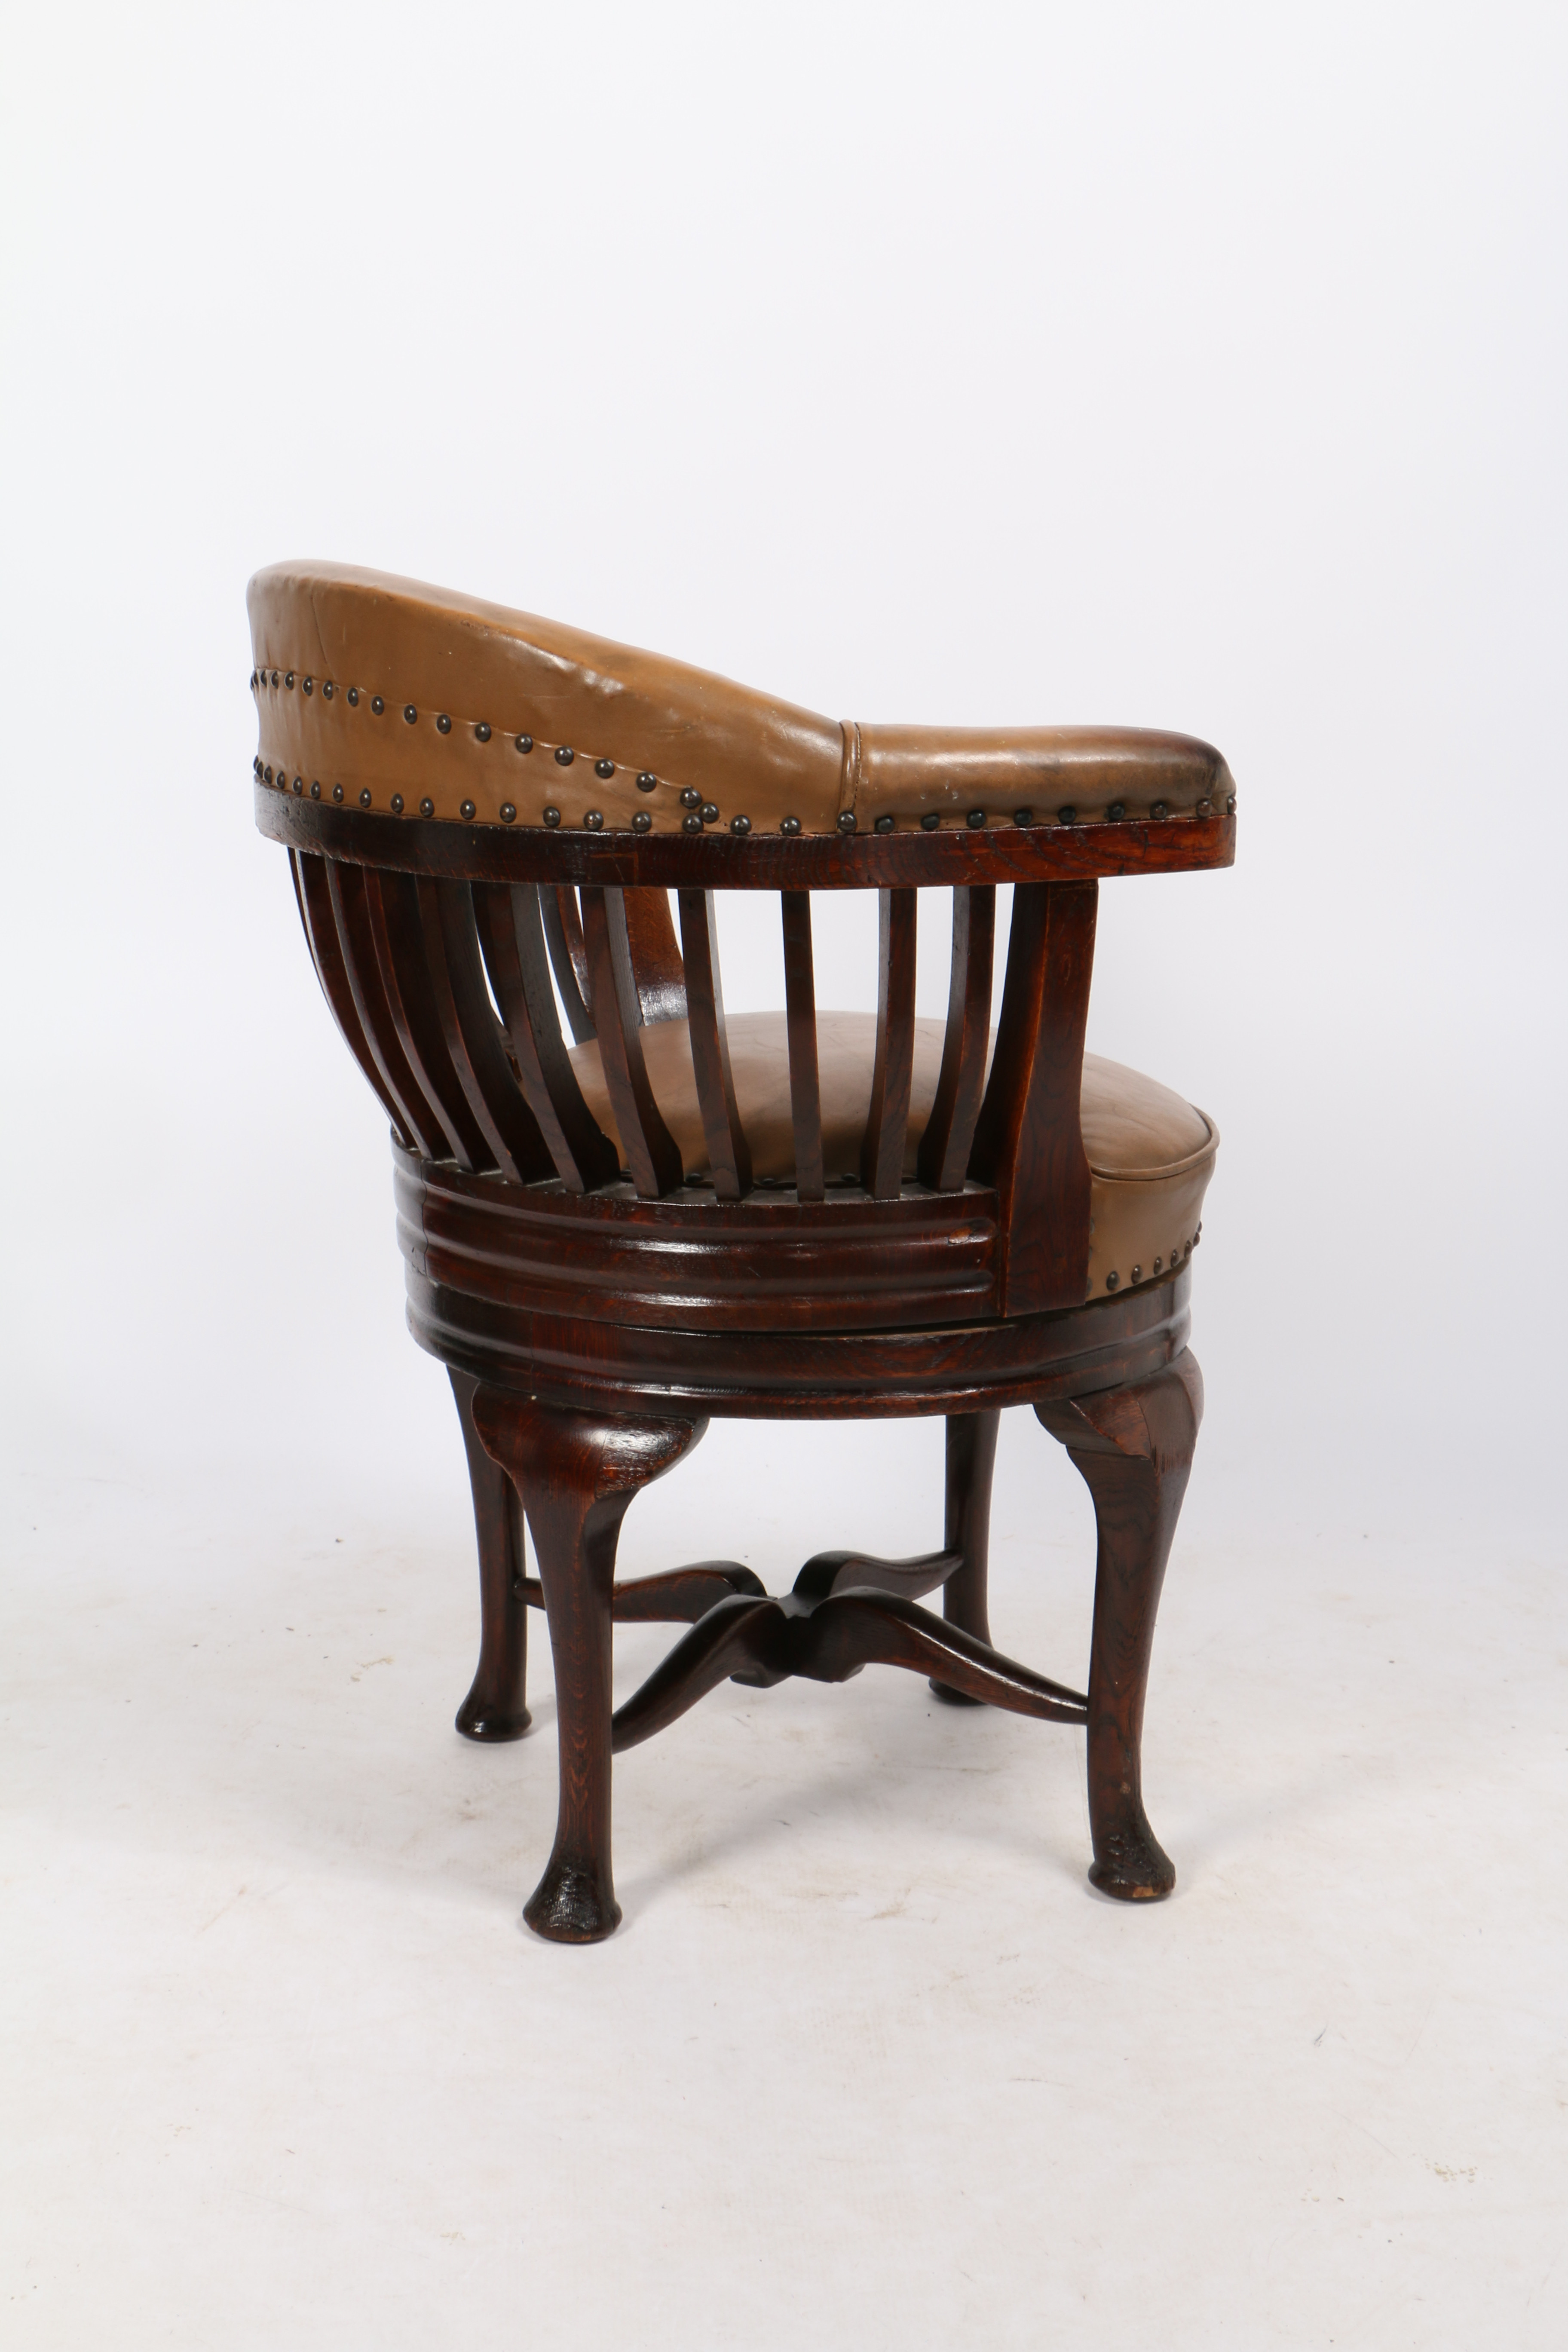 AN EARLY 20TH CENTURY OAK AND LEATHER CAPTAIN'S SWIVEL DESK CHAIR. - Image 7 of 7